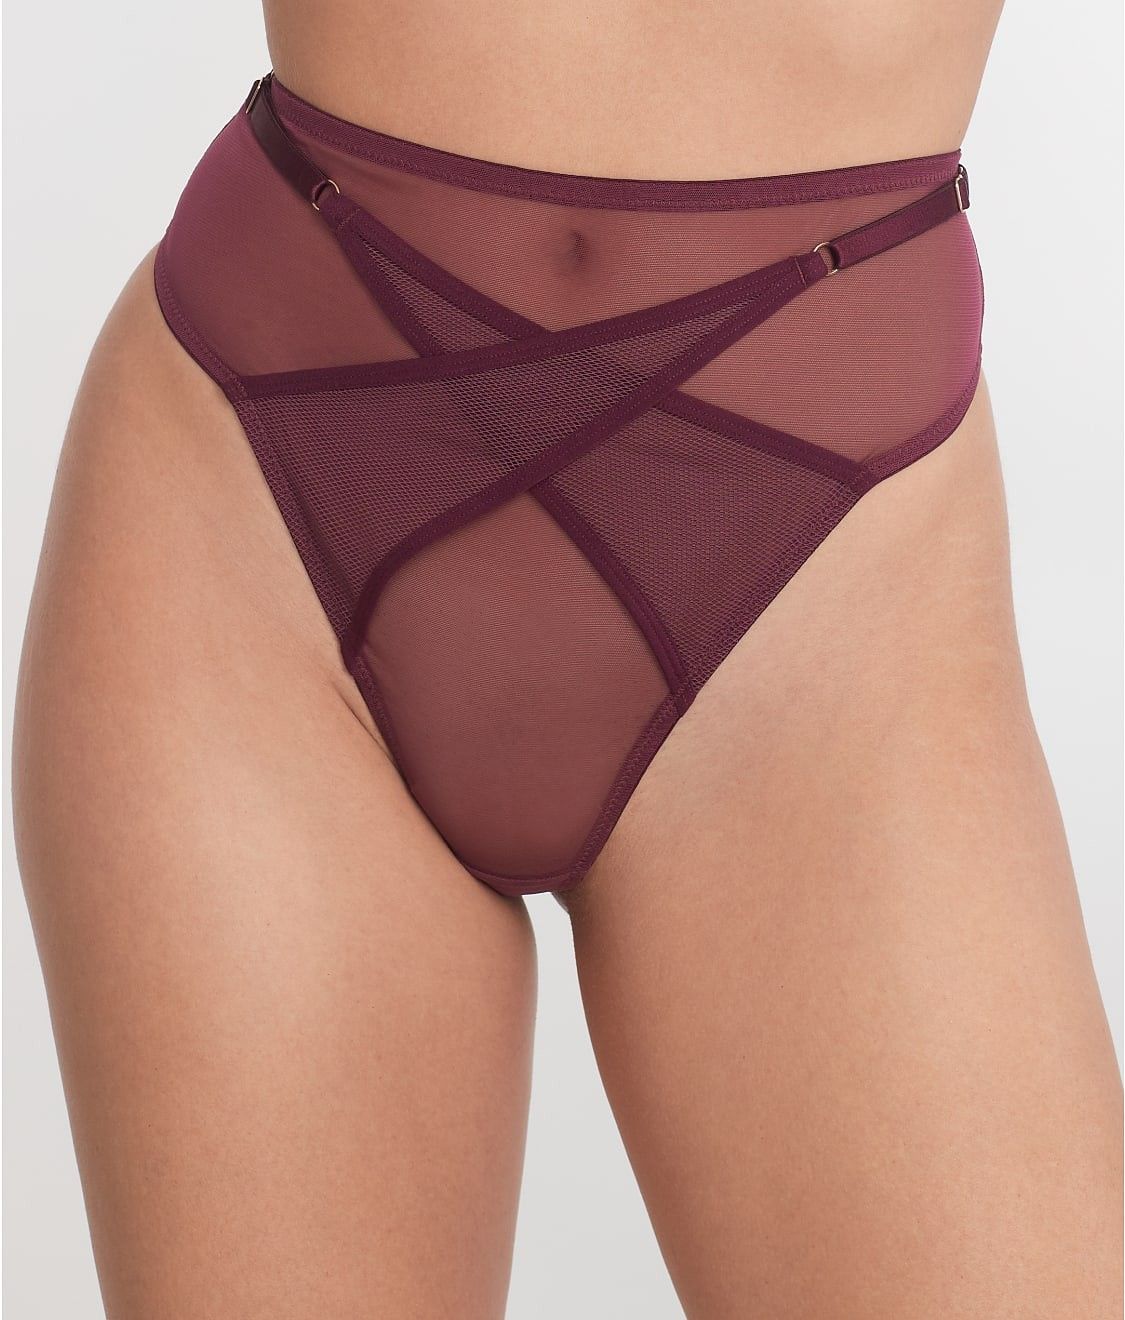 New Torrid Red Satin Bow Cutout Cheeky Valentines Day Panty